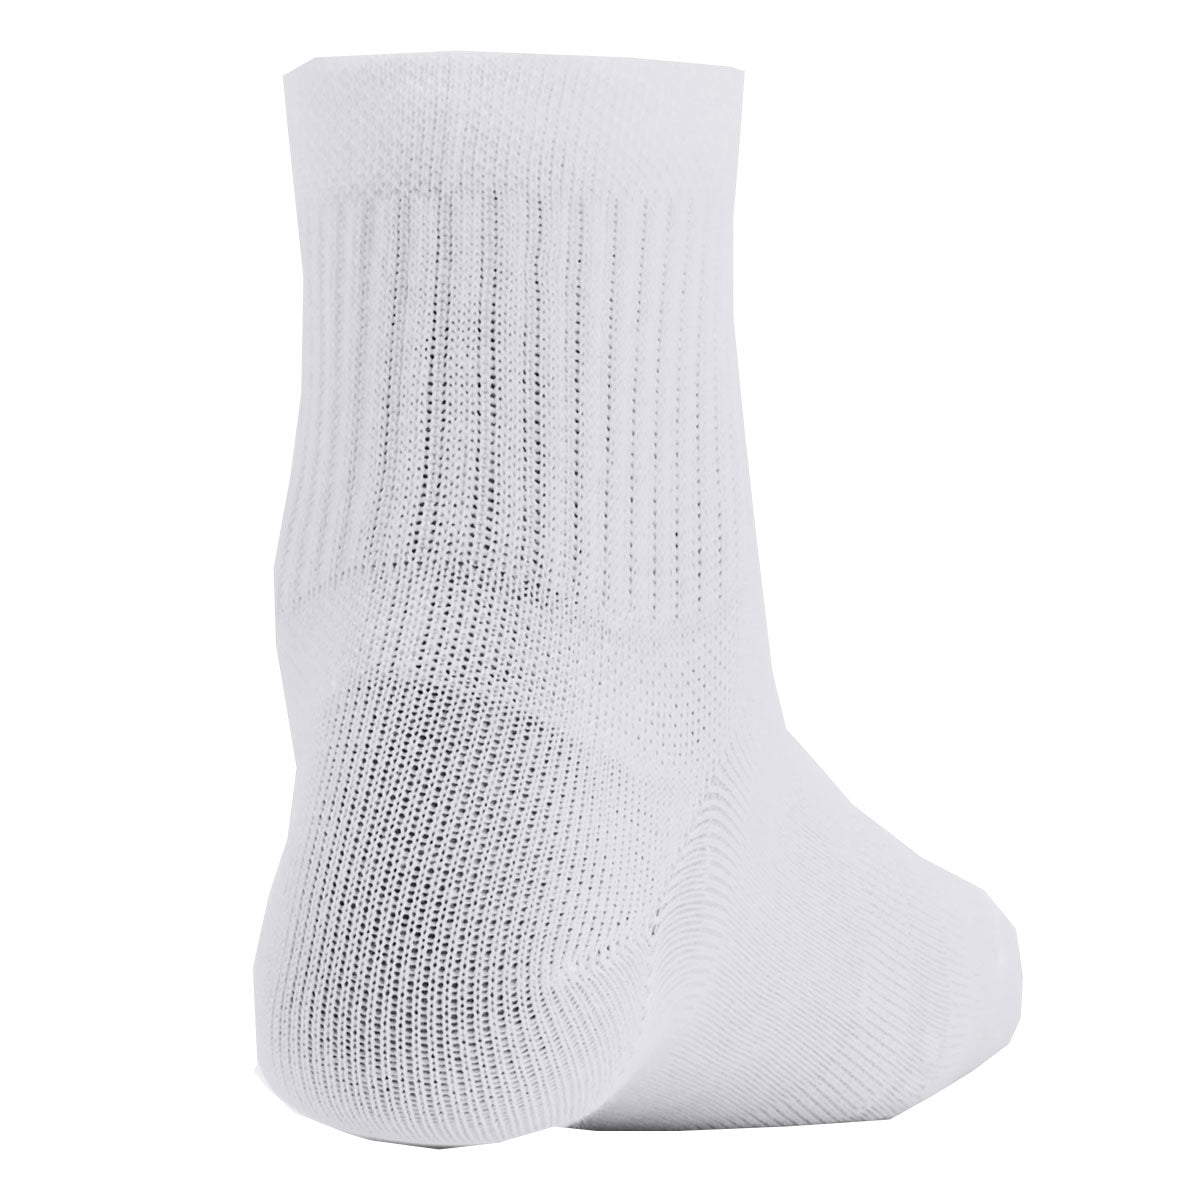 Under Armour Essential 3 Pack Quarter Socks - Youth - White/Halo Grey